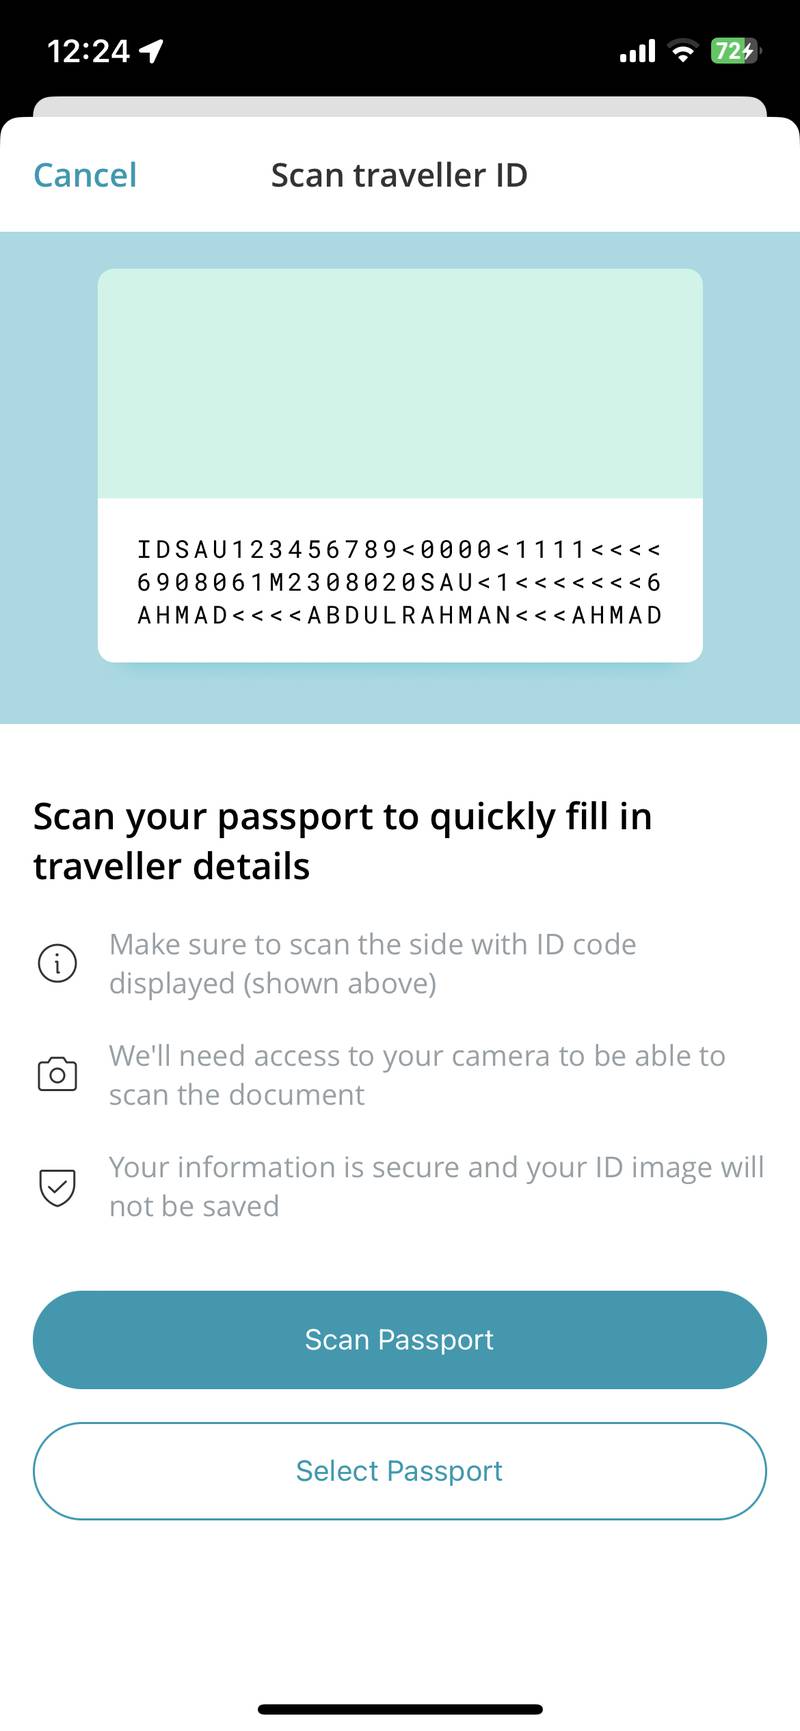 Almosafer said the implementation of passport scanning using VisionKit has reduced errors and streamlined the user journey. Photo: Almosafer